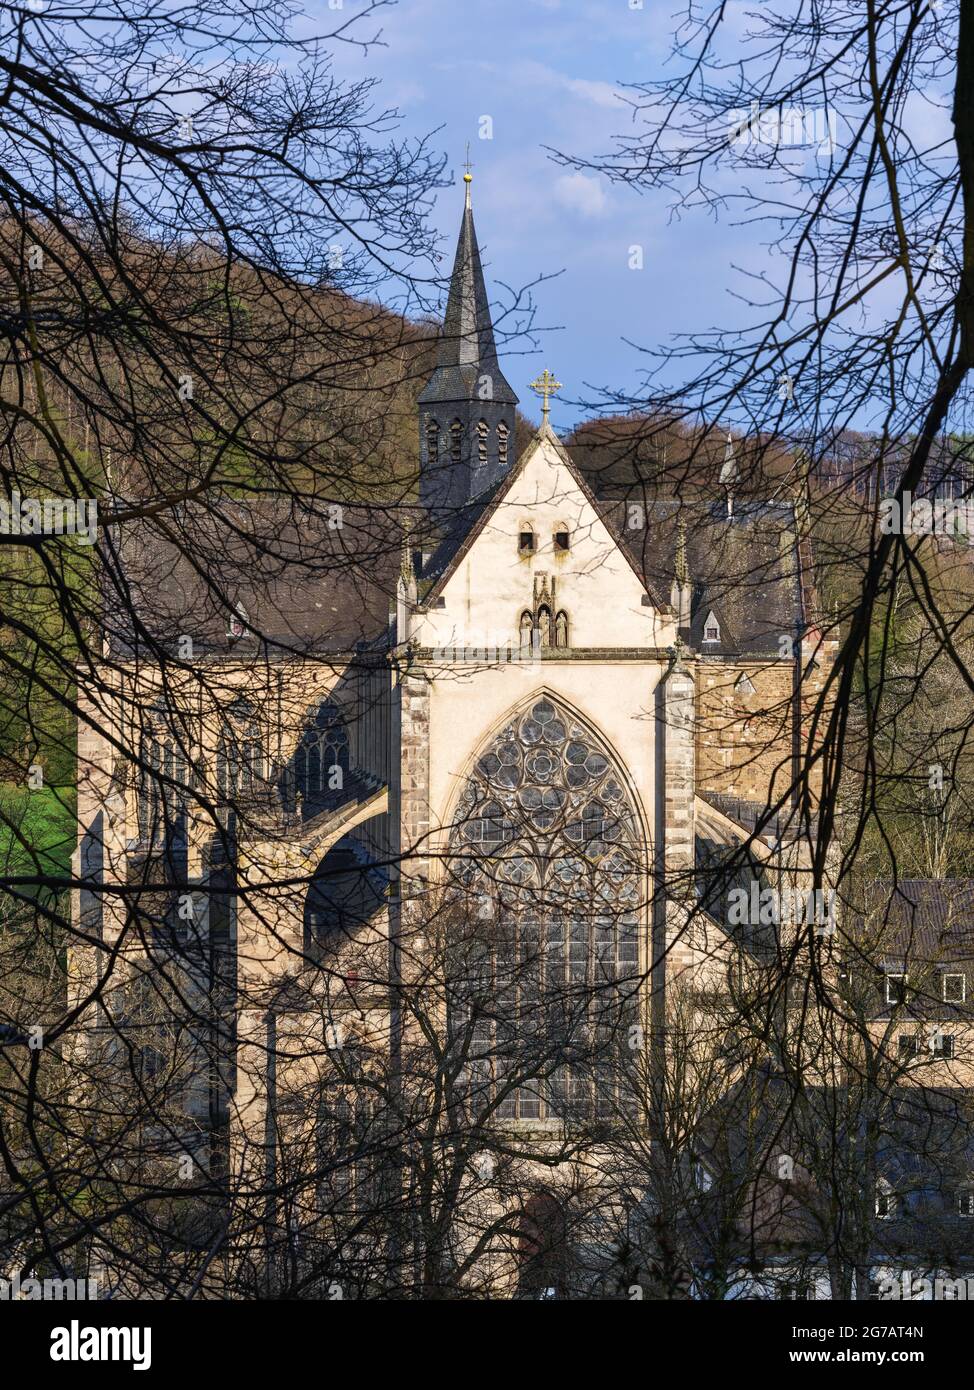 Cathedral, monastery church, church, Gothic, Gothic architectural style, Bergisches Land, historical place of worship, place of worship, place of interest, historical place of interest, monastery, sacred building, abbey, Bergisch cathedral Stock Photo